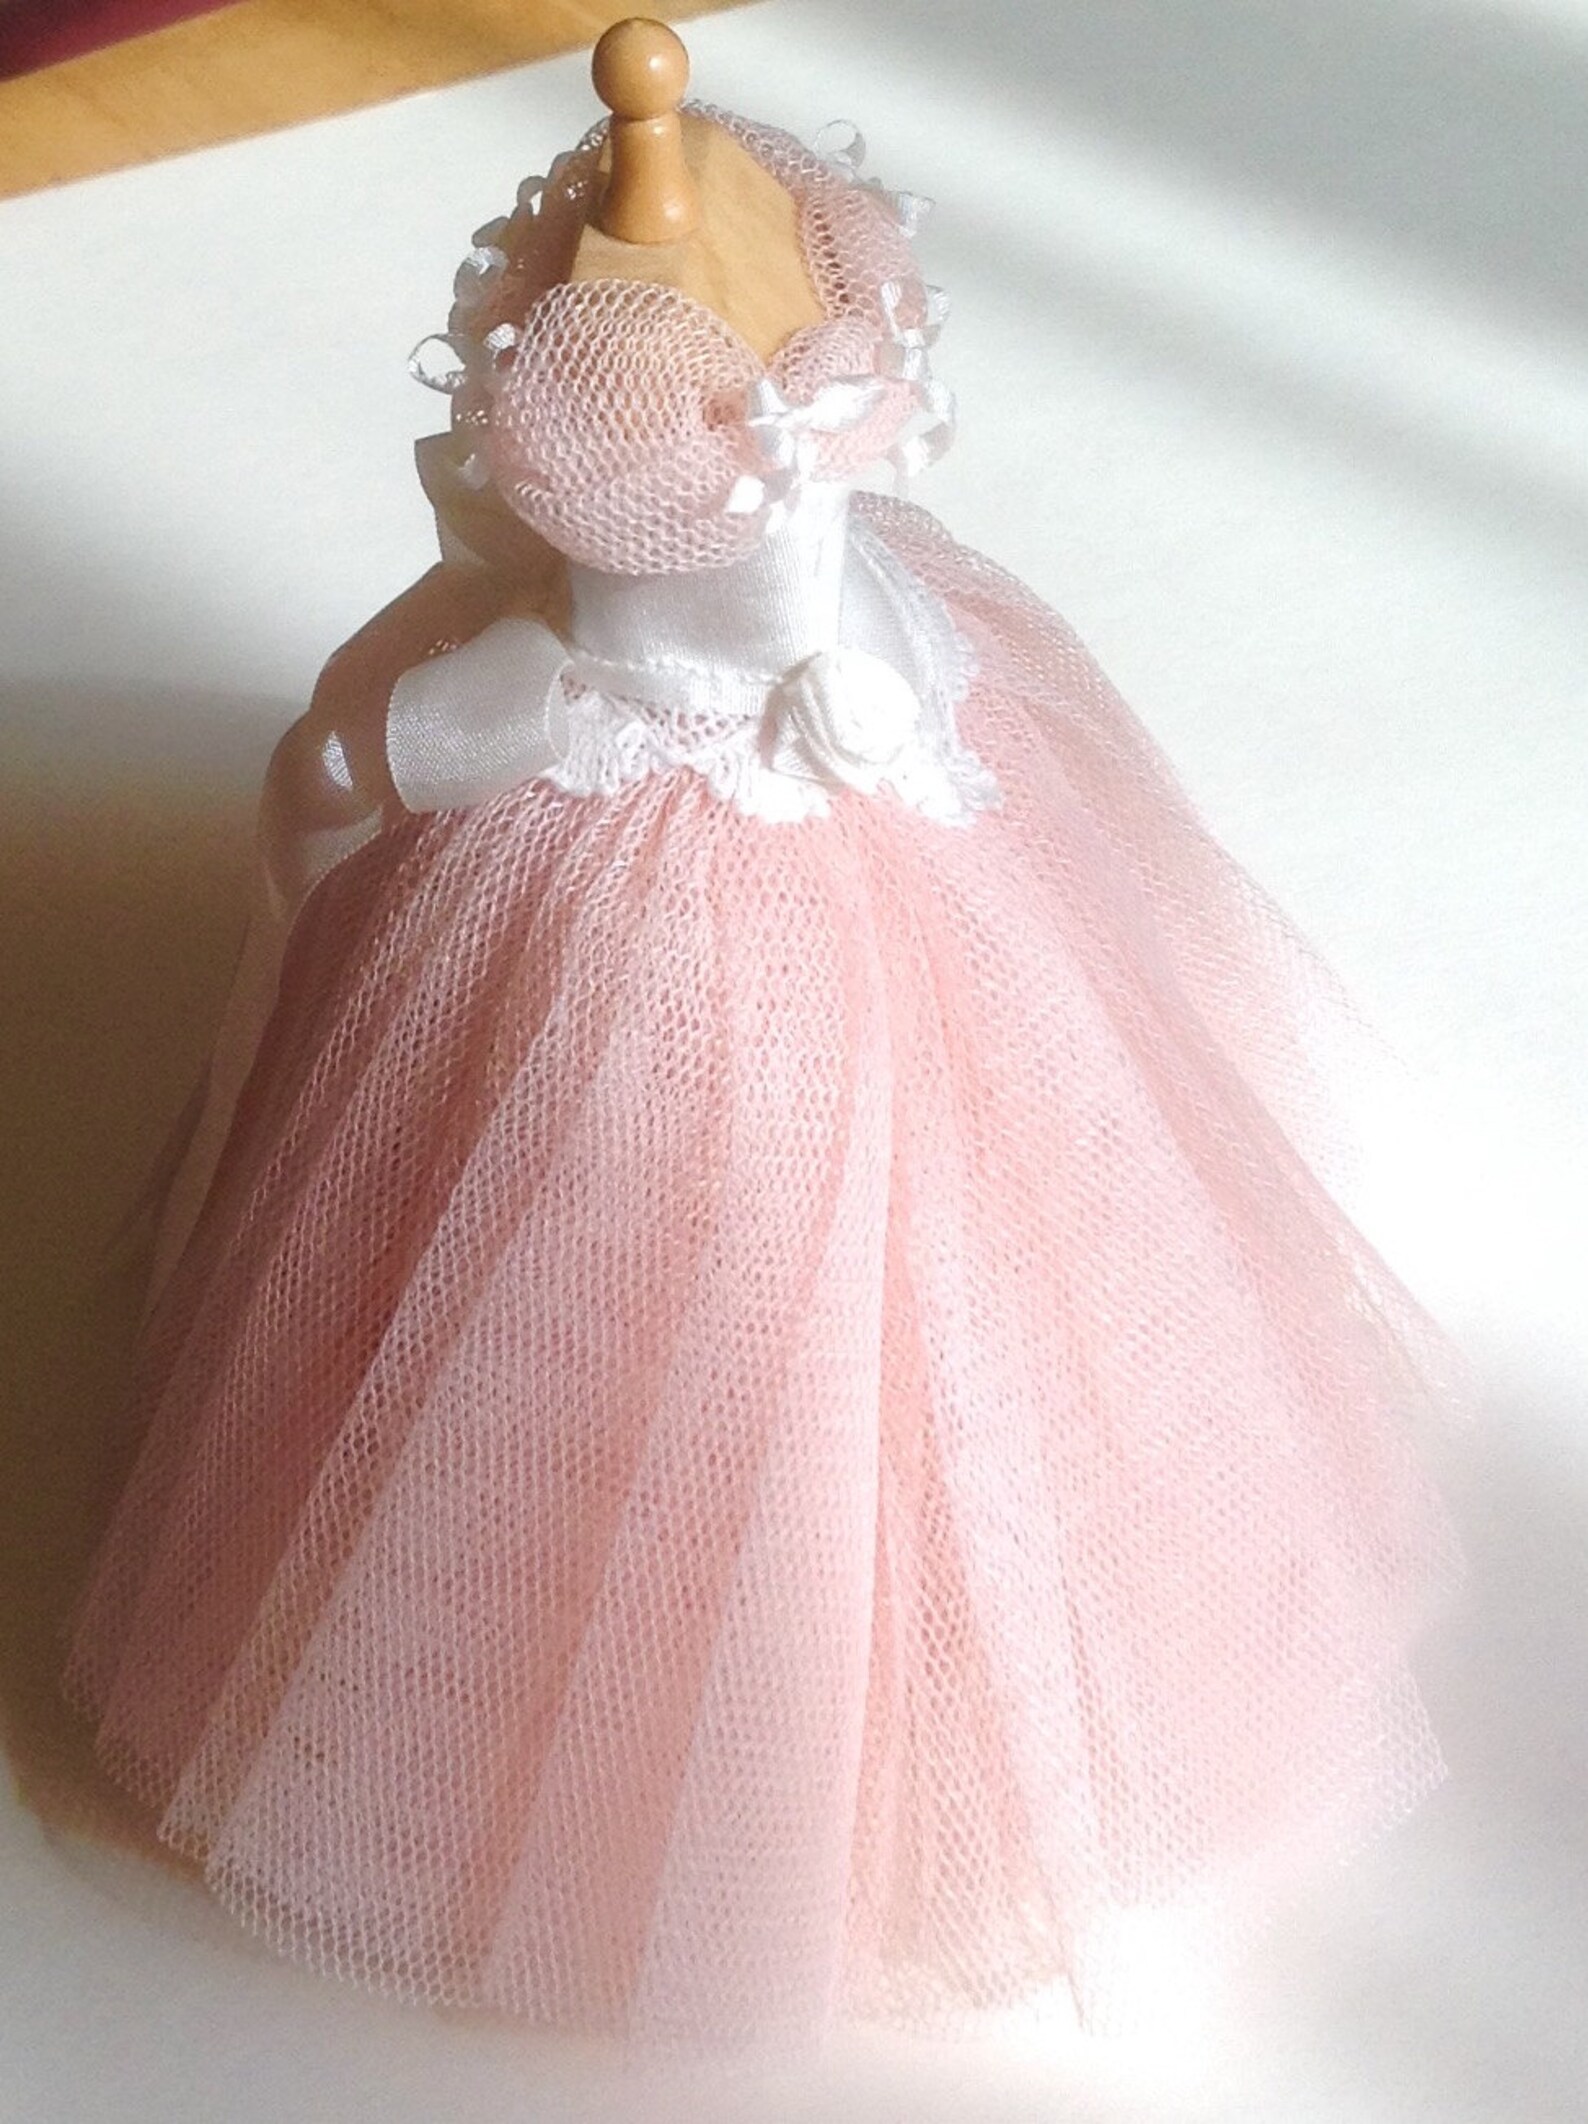 Pink Net Ball Gown on Mannequin 1/12th Scale Dollhouse - Etsy